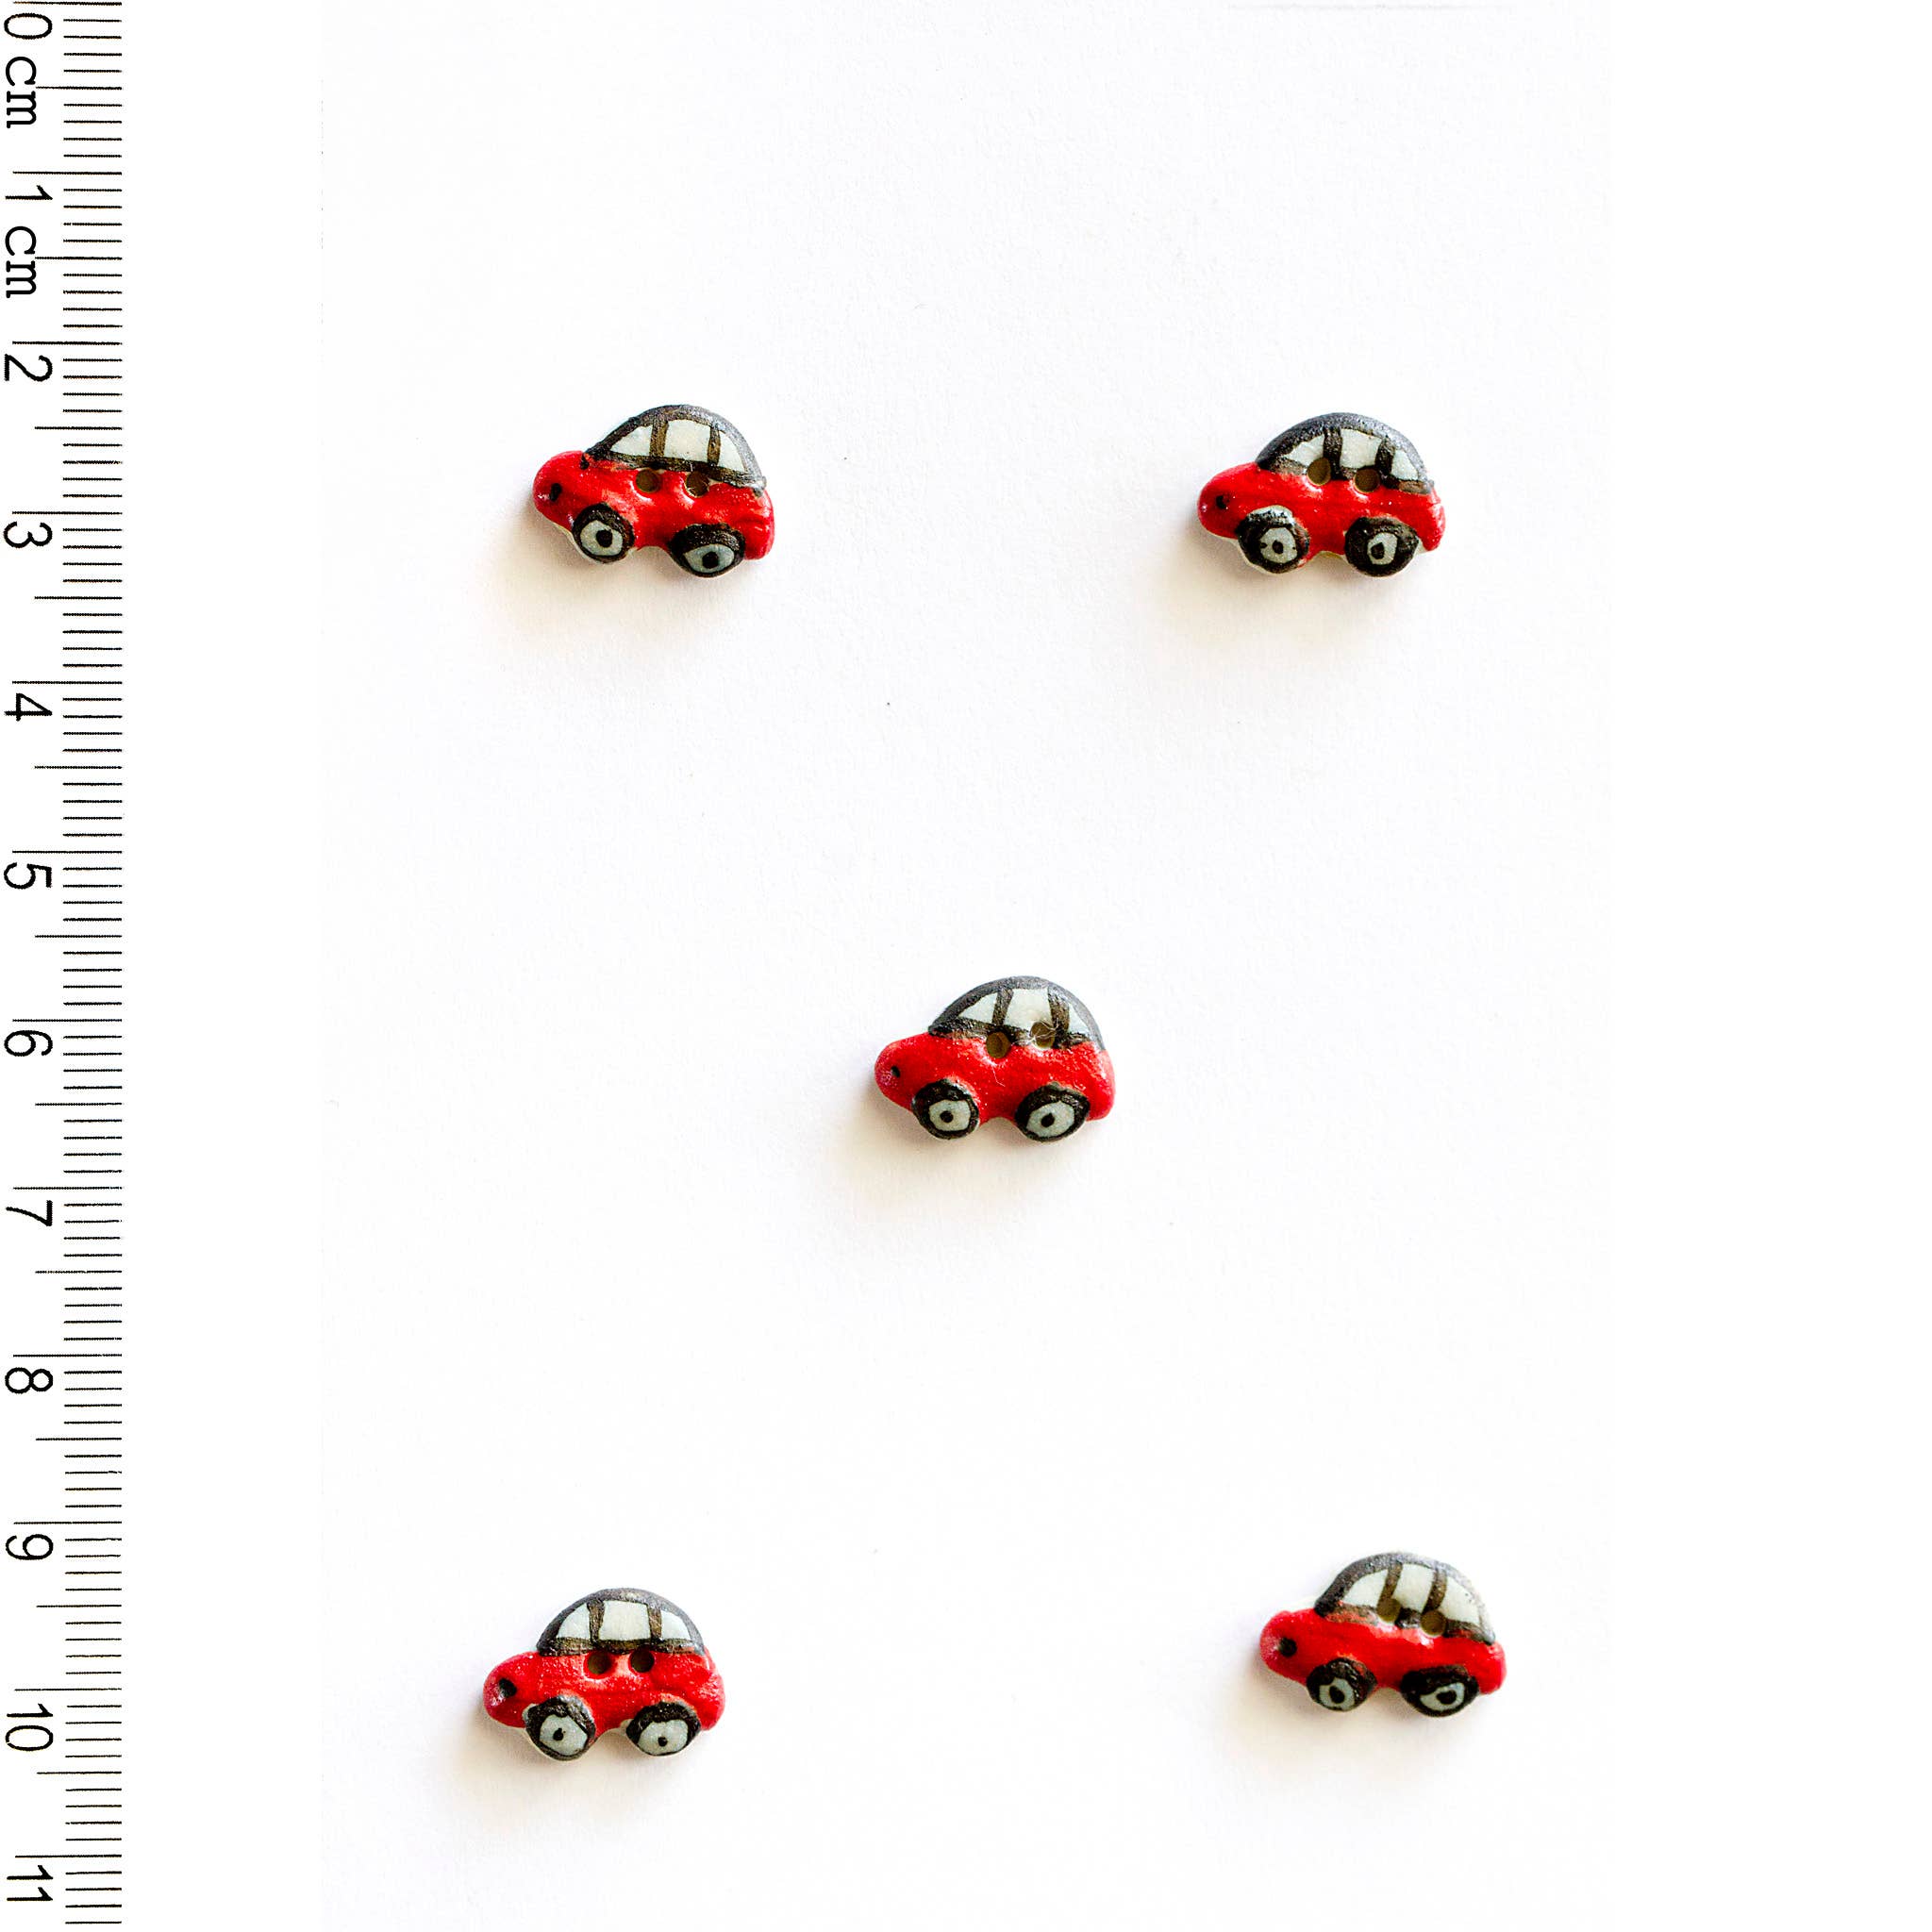 Incomparable Buttons - 5 Tiny Car Buttons